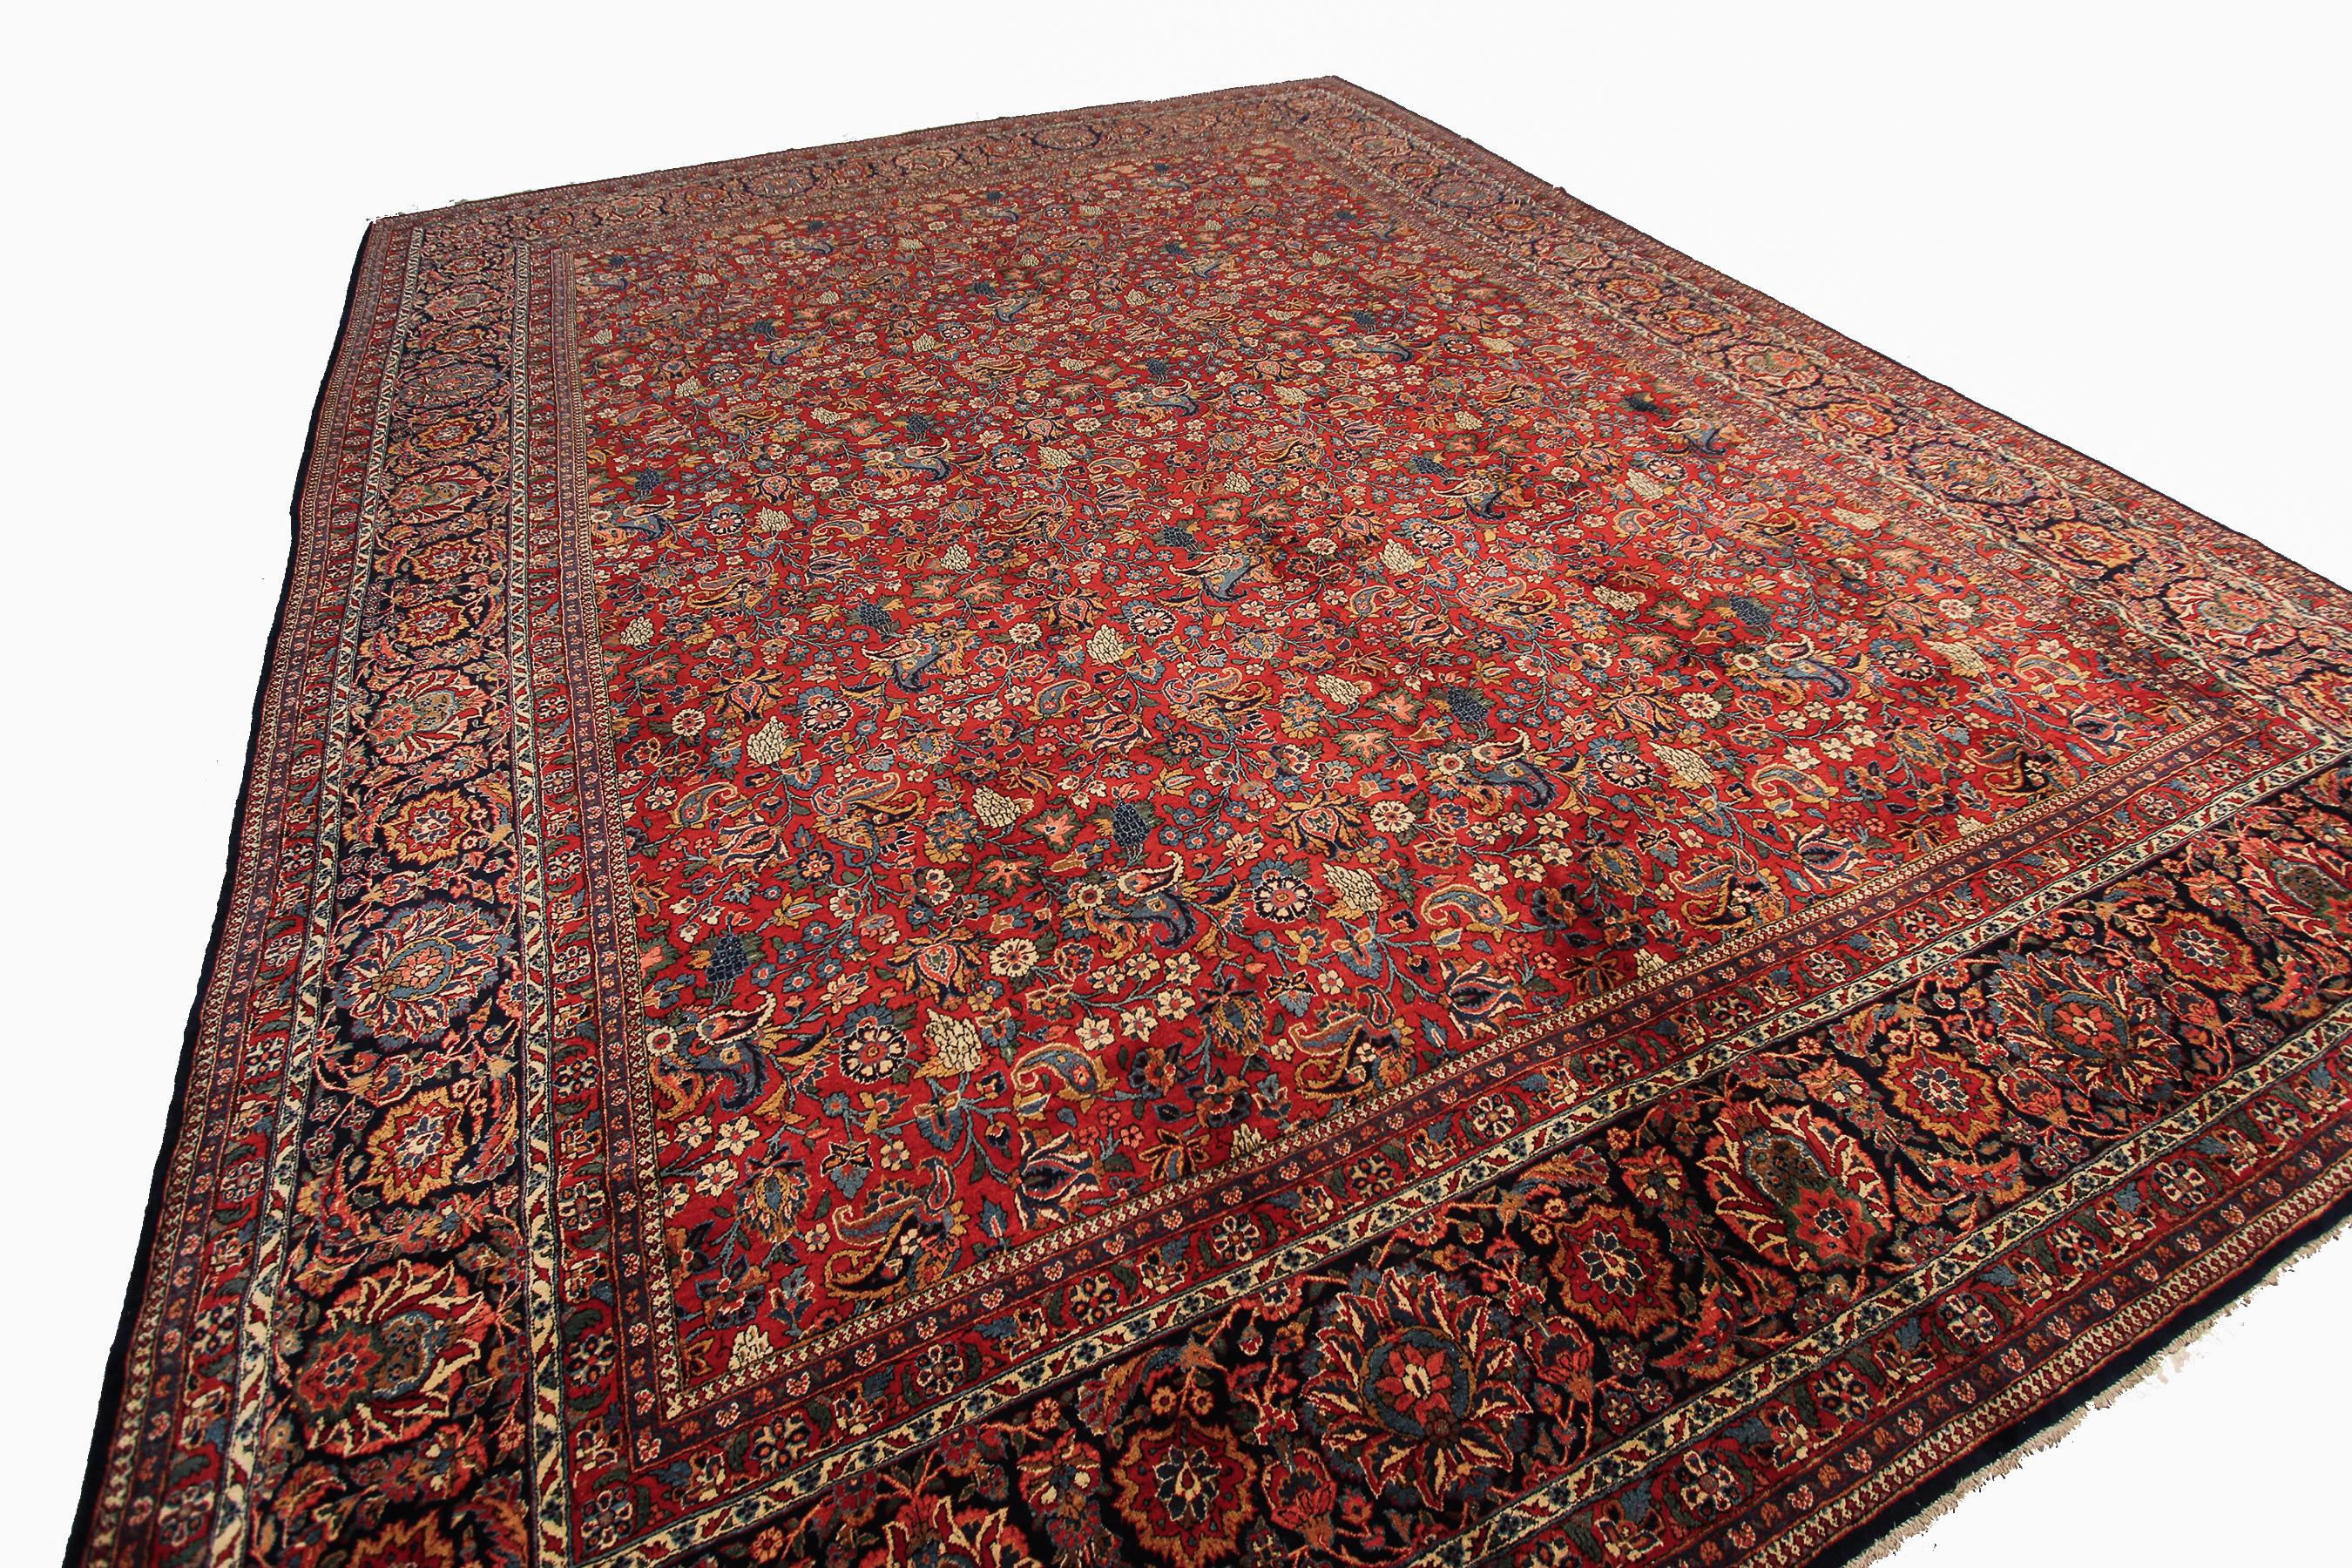 Early 20th Century Antique Persian Dabir Kashan Rug Kork Wool Geometric Overall For Sale